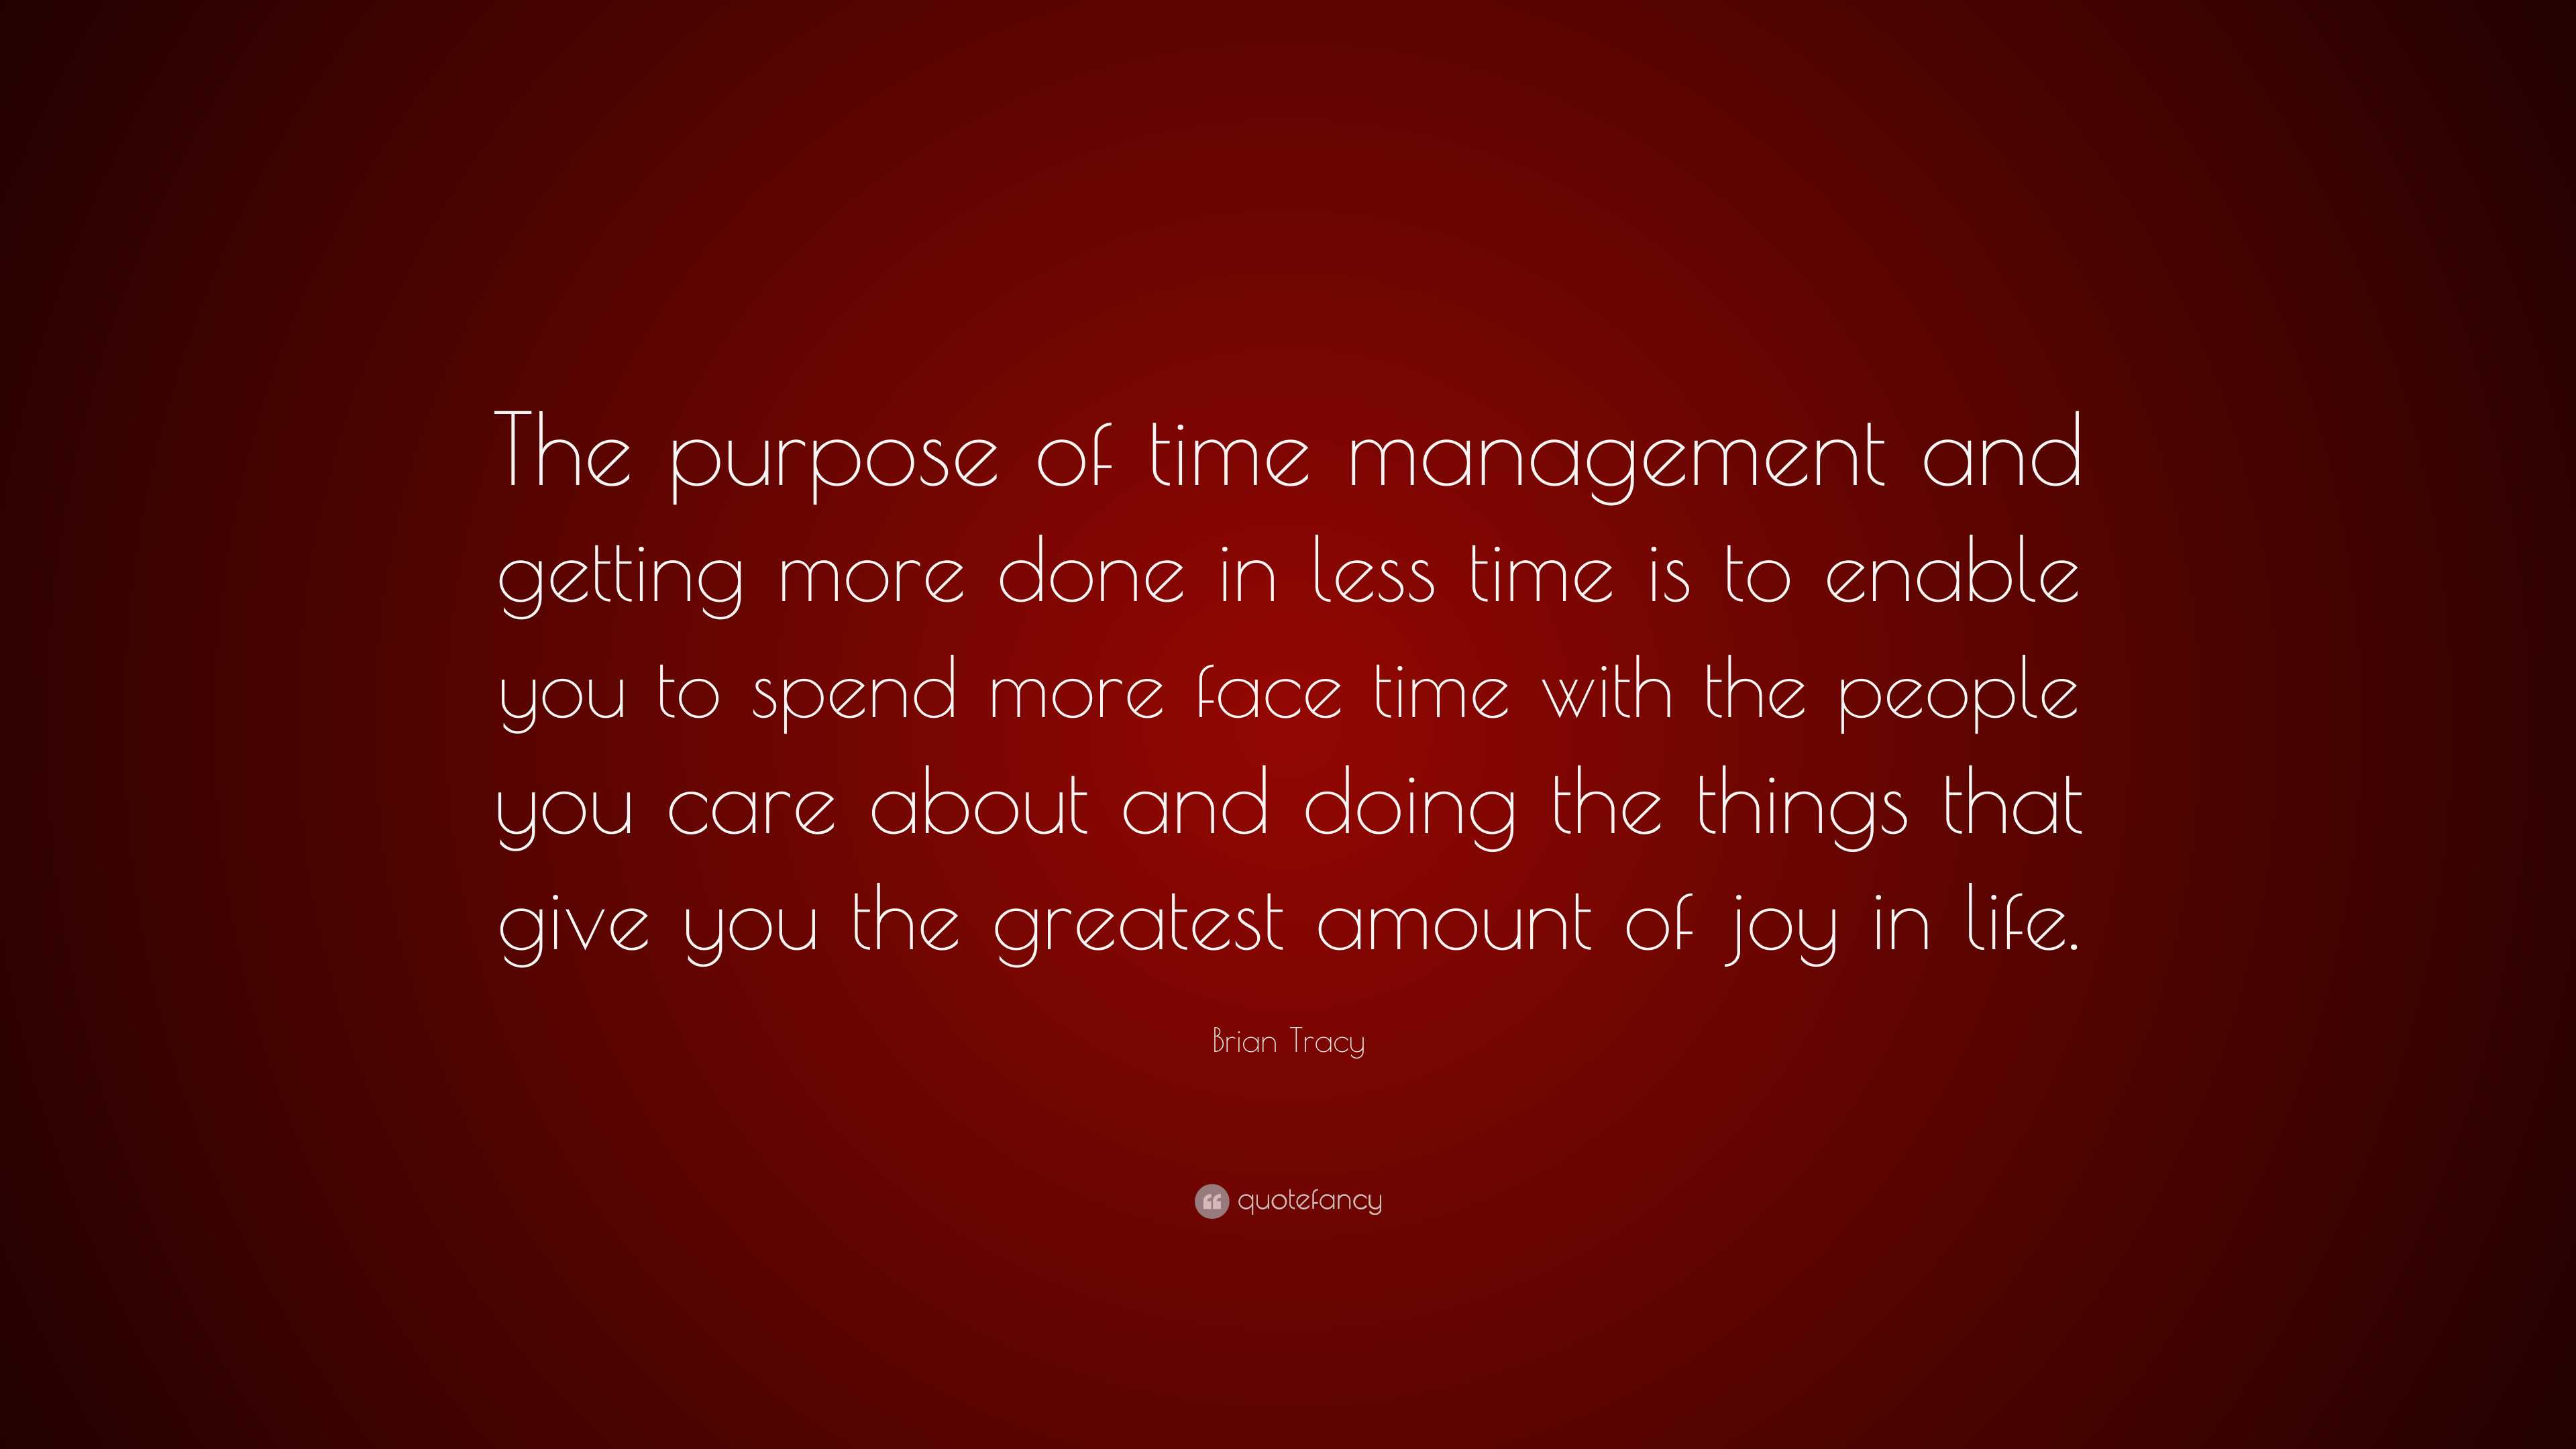 Brian Tracy Quote “the Purpose Of Time Management And Getting More Done In Less Time Is To